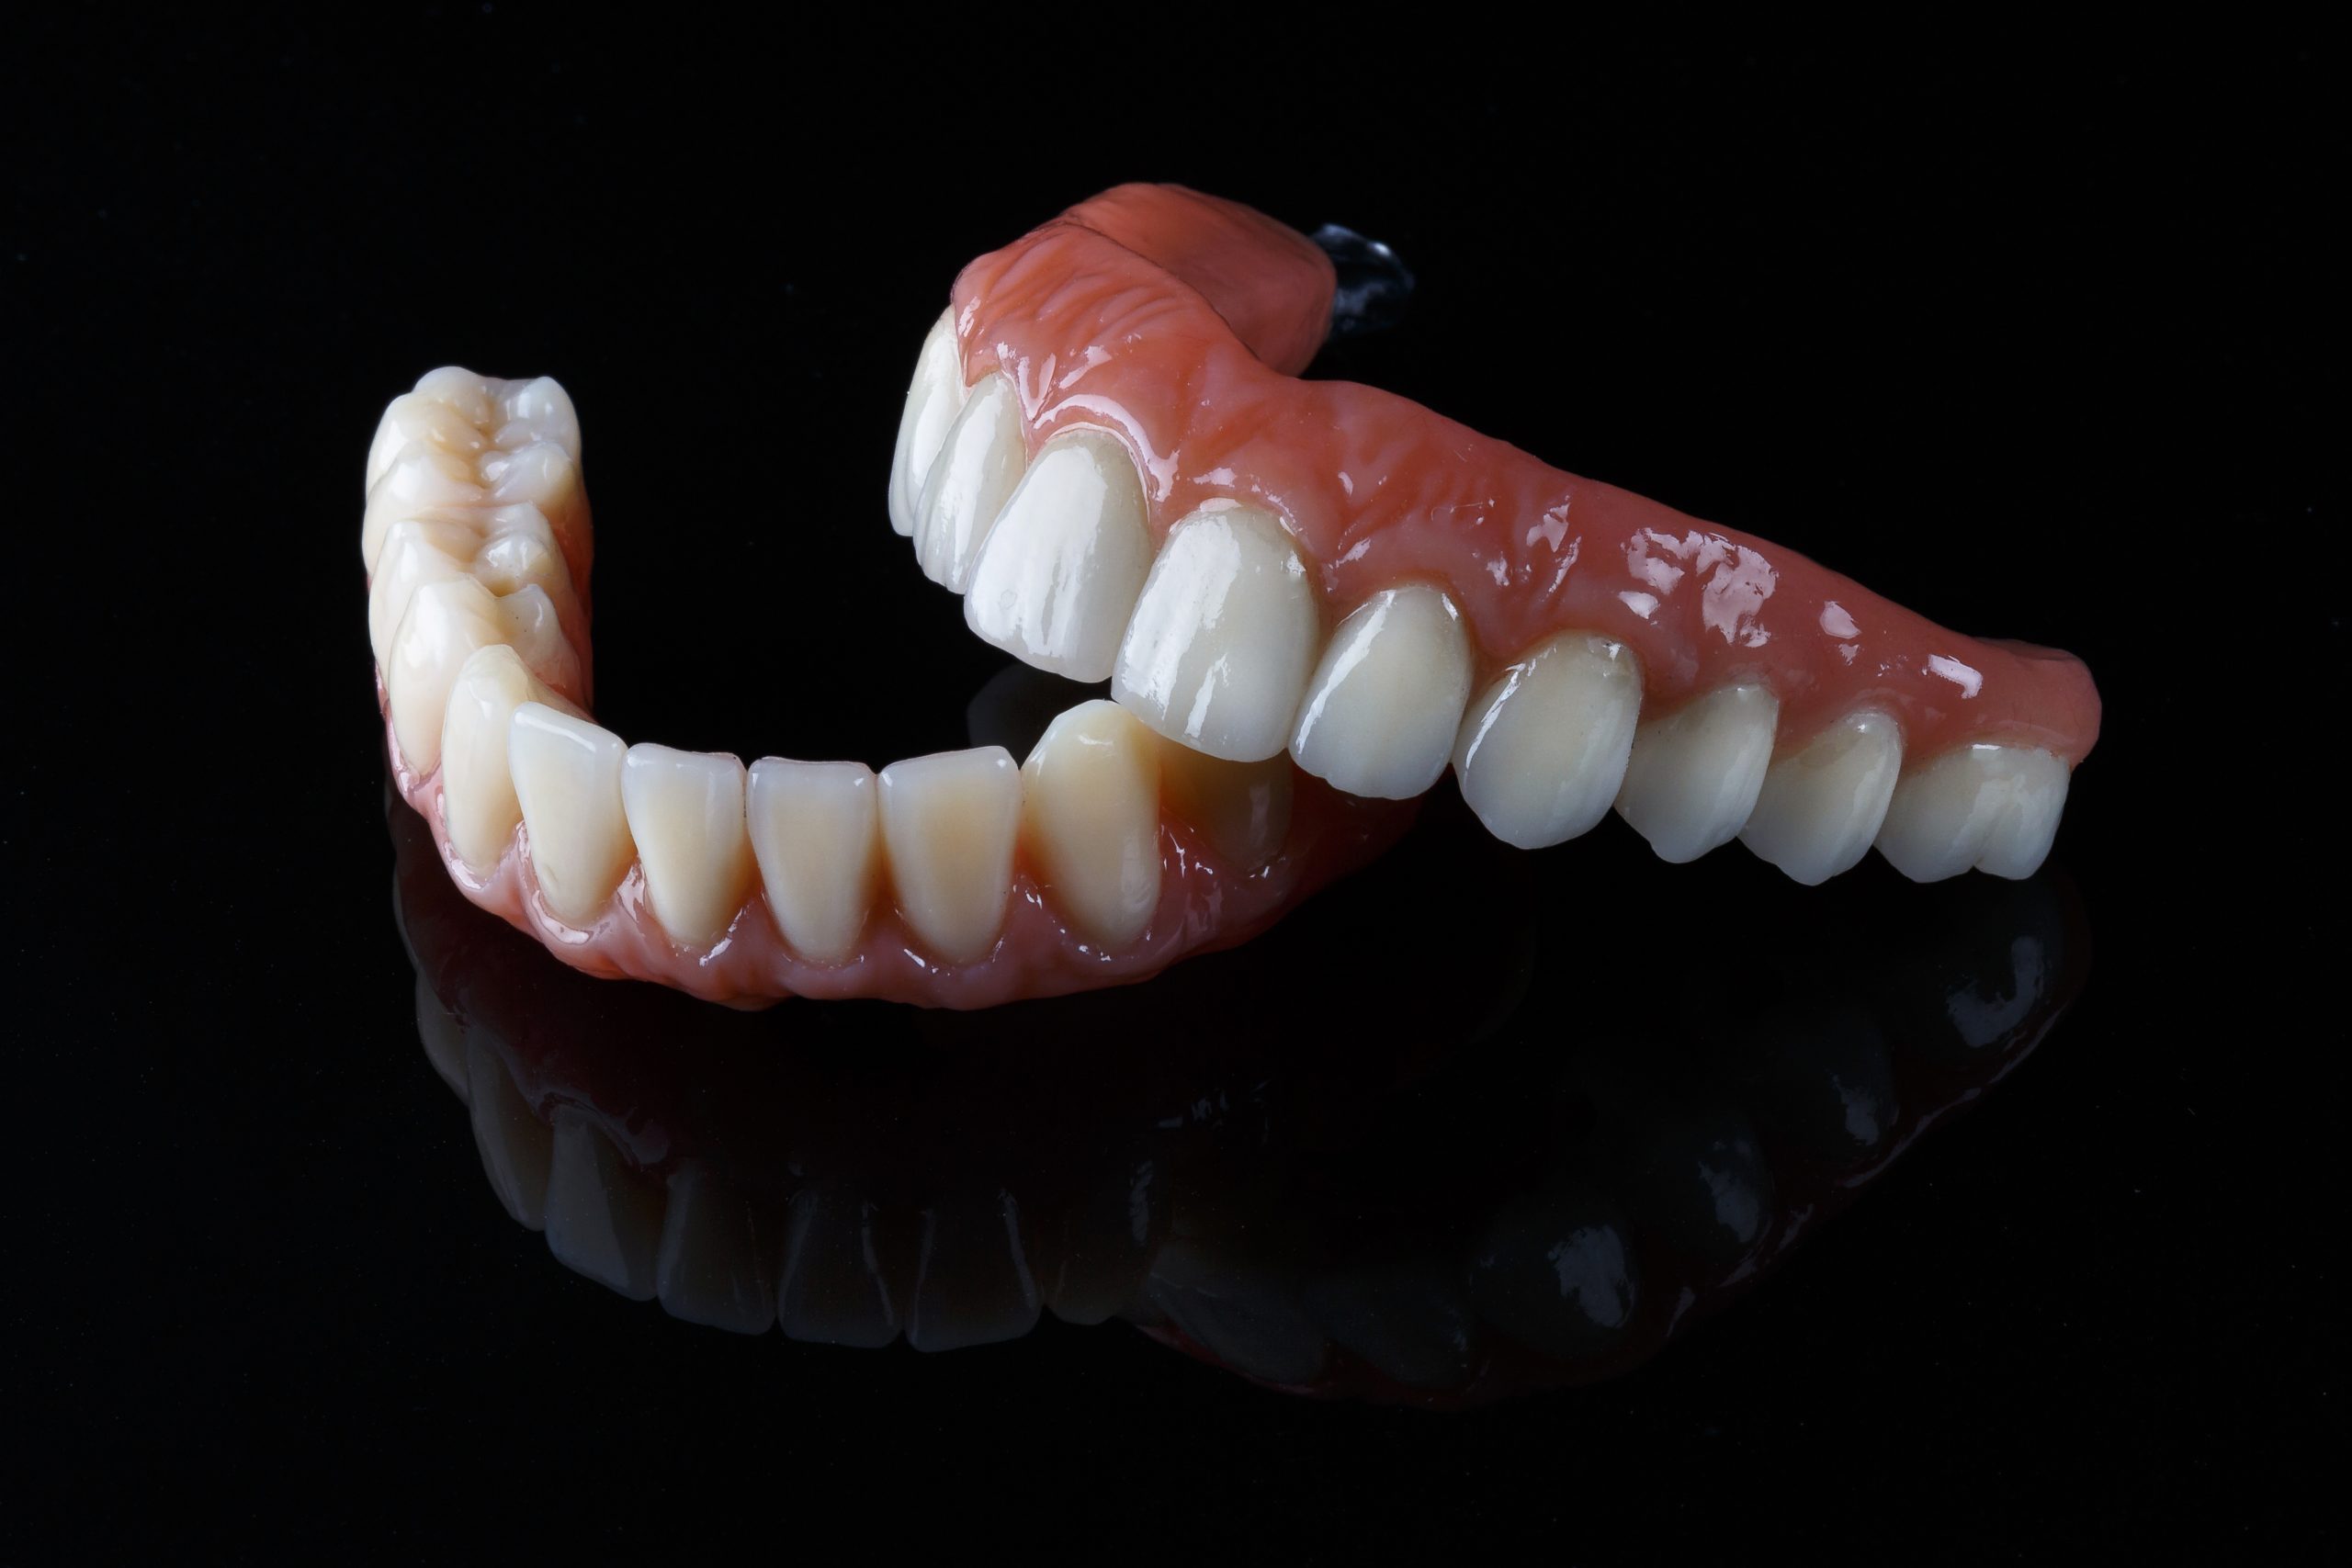 ceramic prosthesis with artificial gums, upper and lower jaw on black glass